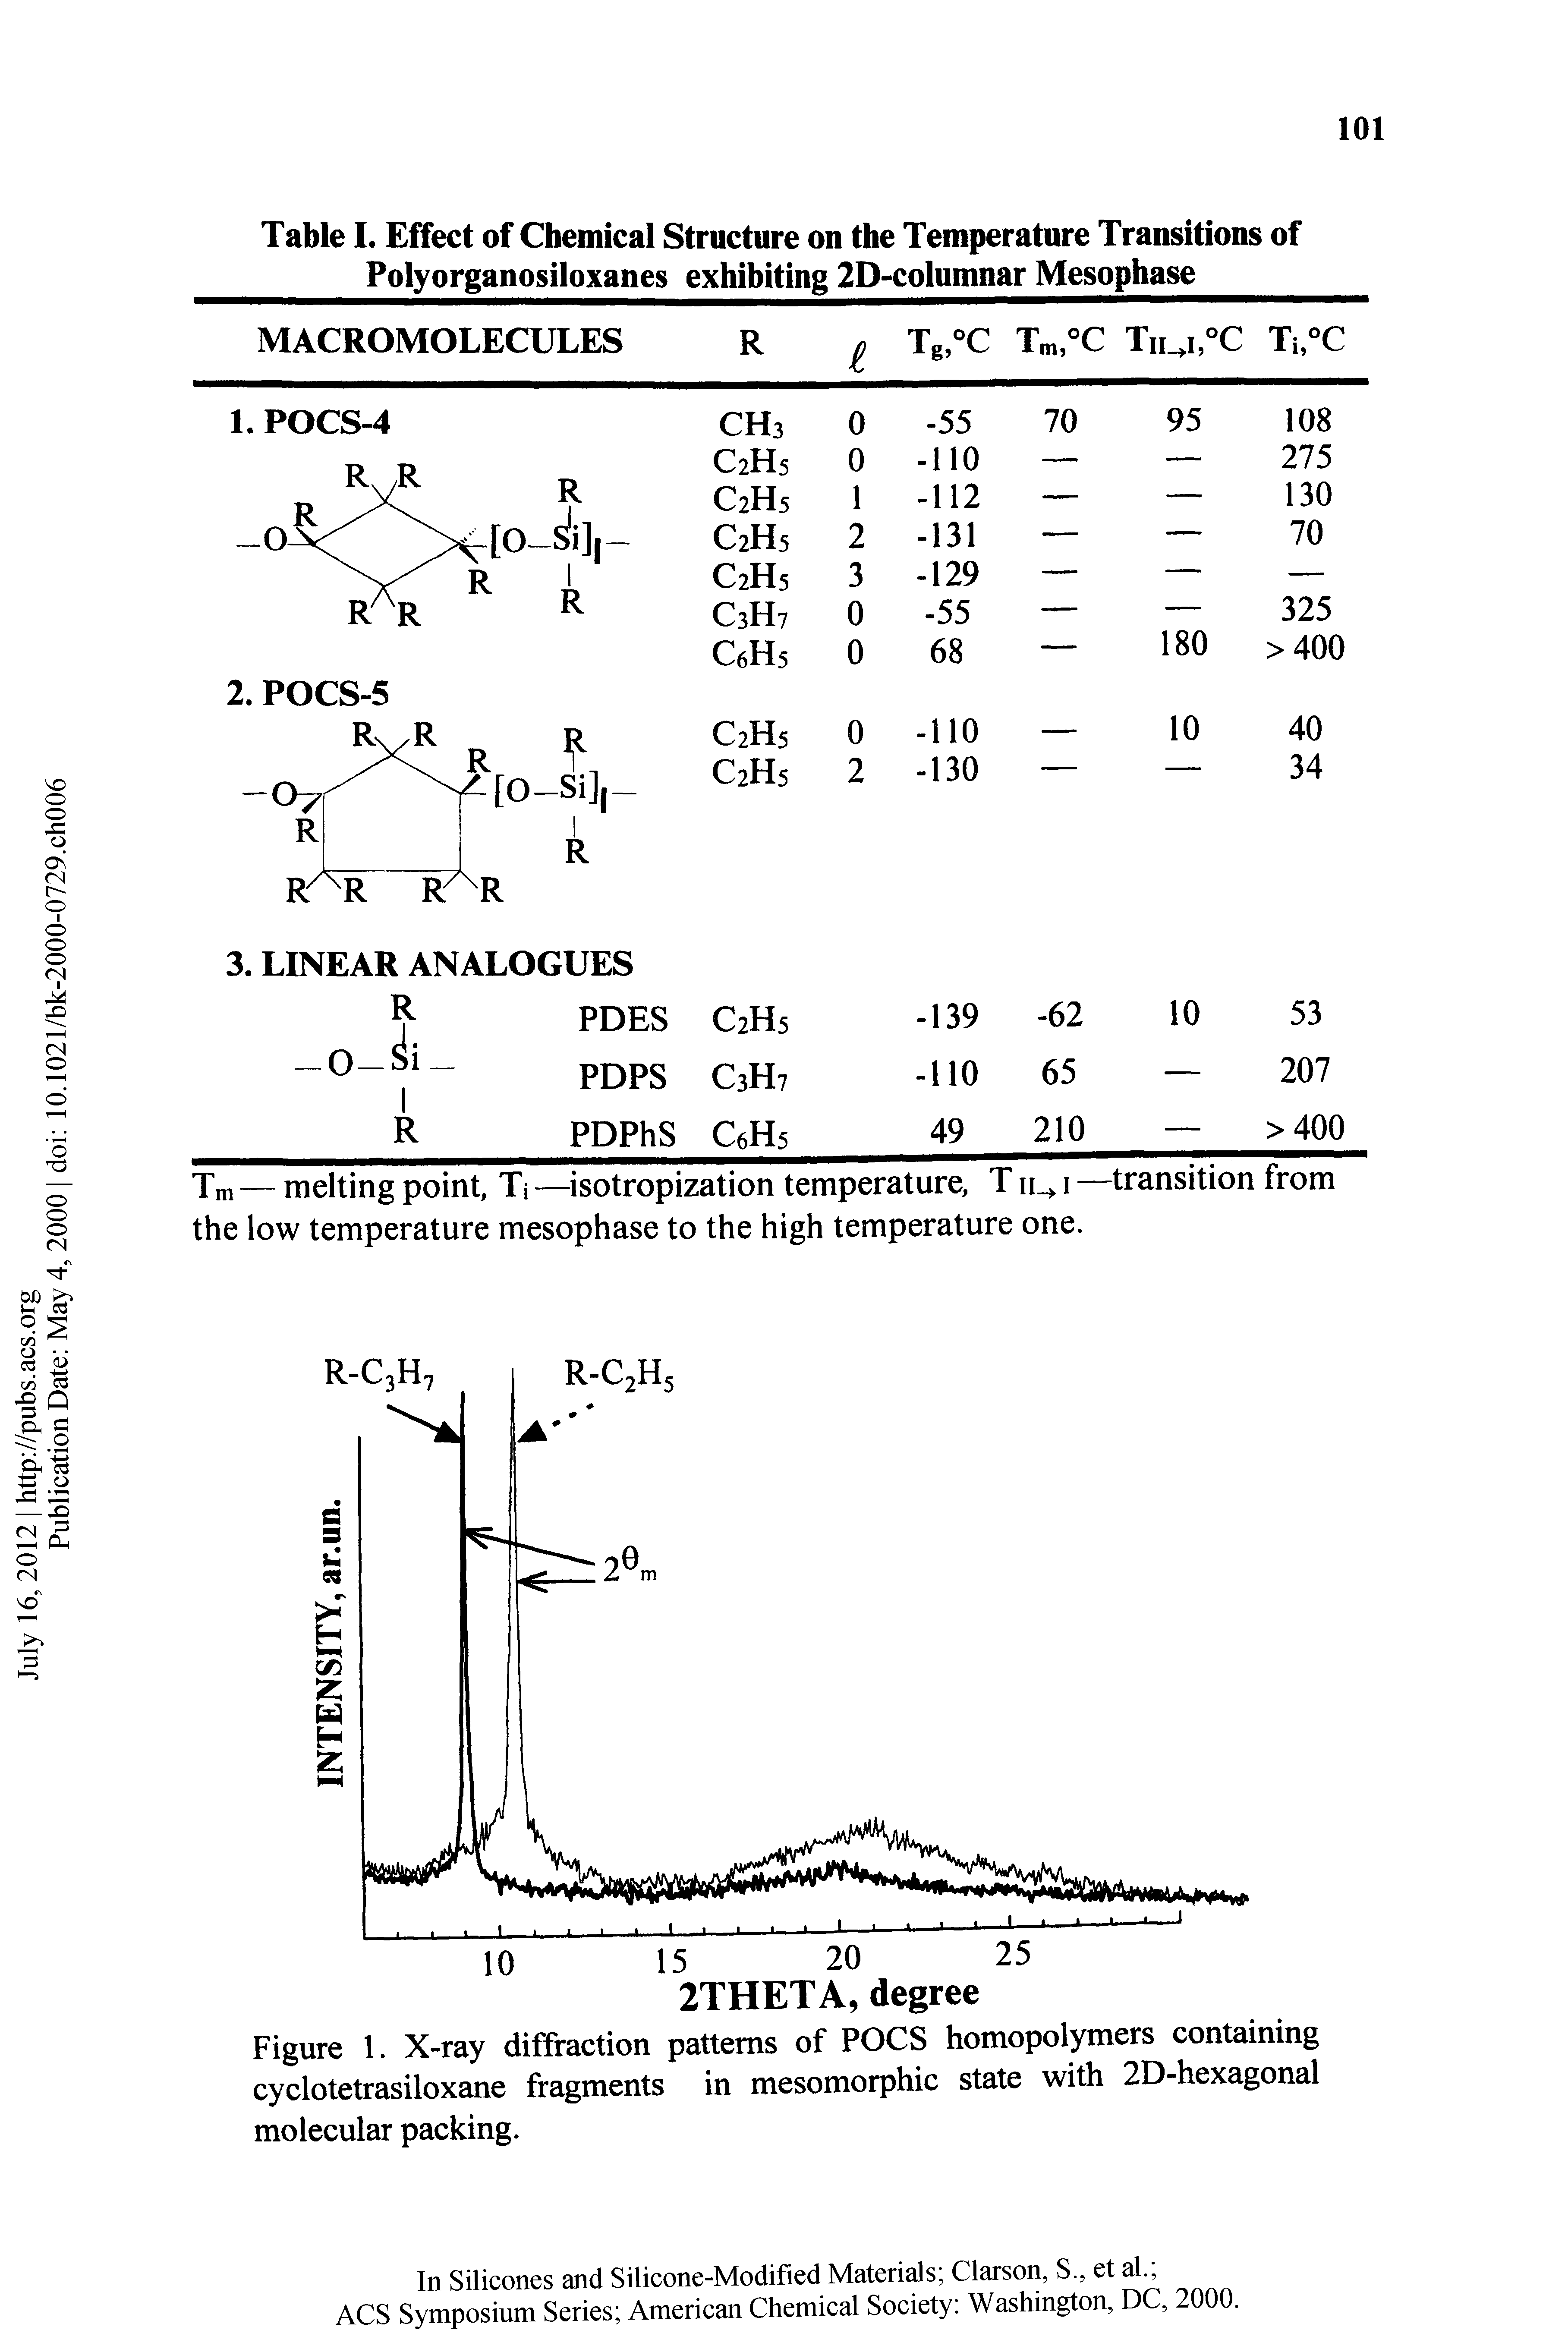 Table I. Effect of Chemical Structure on the Temperature Transitions of Polyorganosiloxanes exhibiting 2D-columnar Mesophase ...